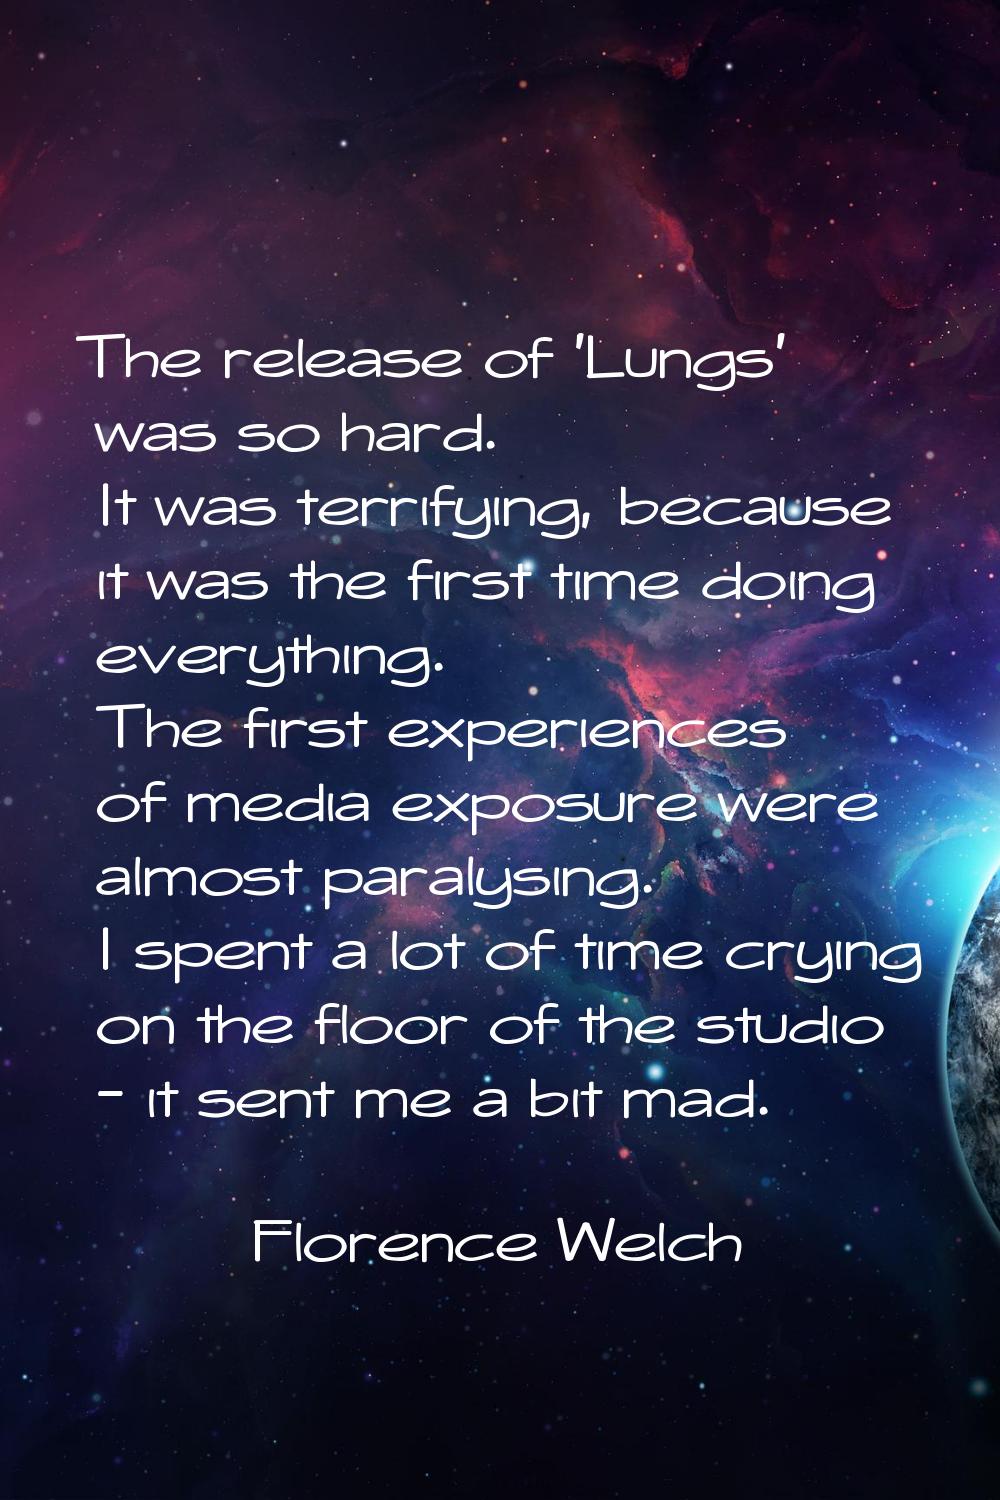 The release of 'Lungs' was so hard. It was terrifying, because it was the first time doing everythi